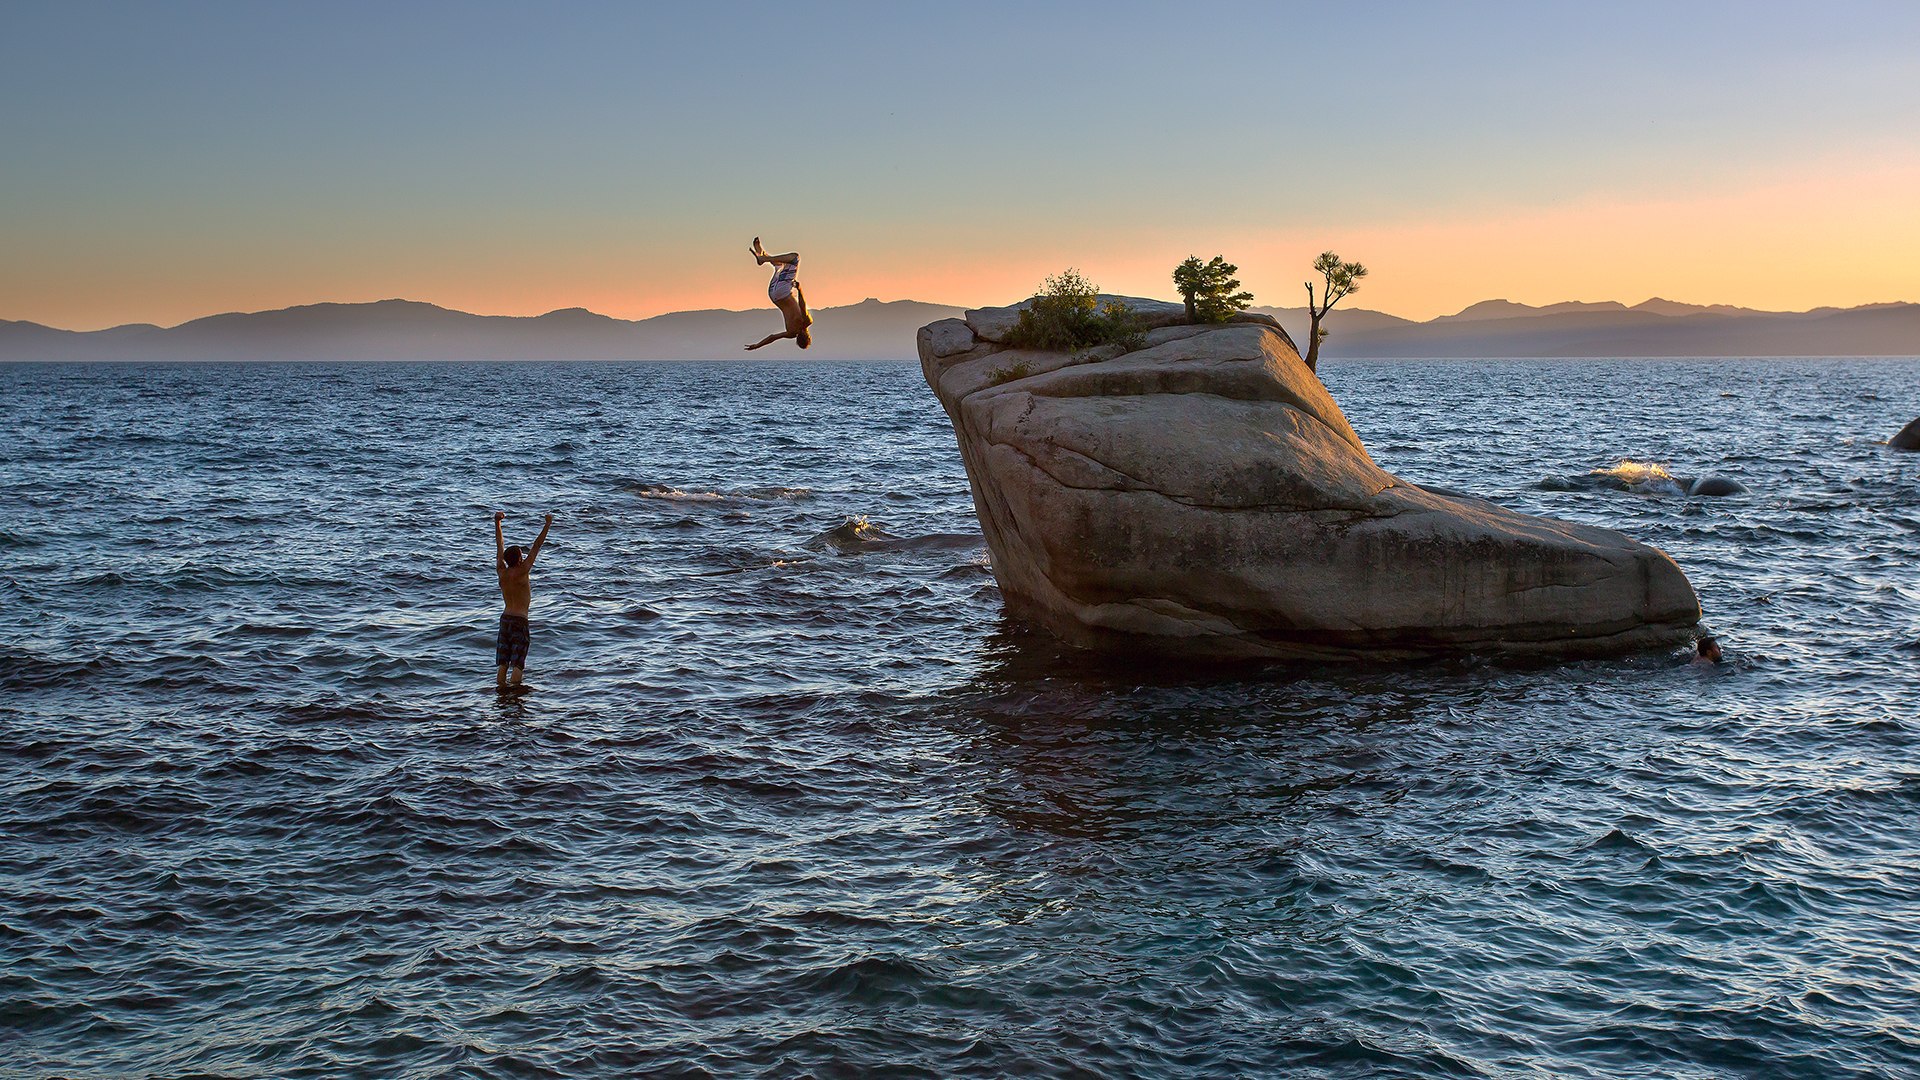 Jumping off a cliff near the shore wallpapers and images ...